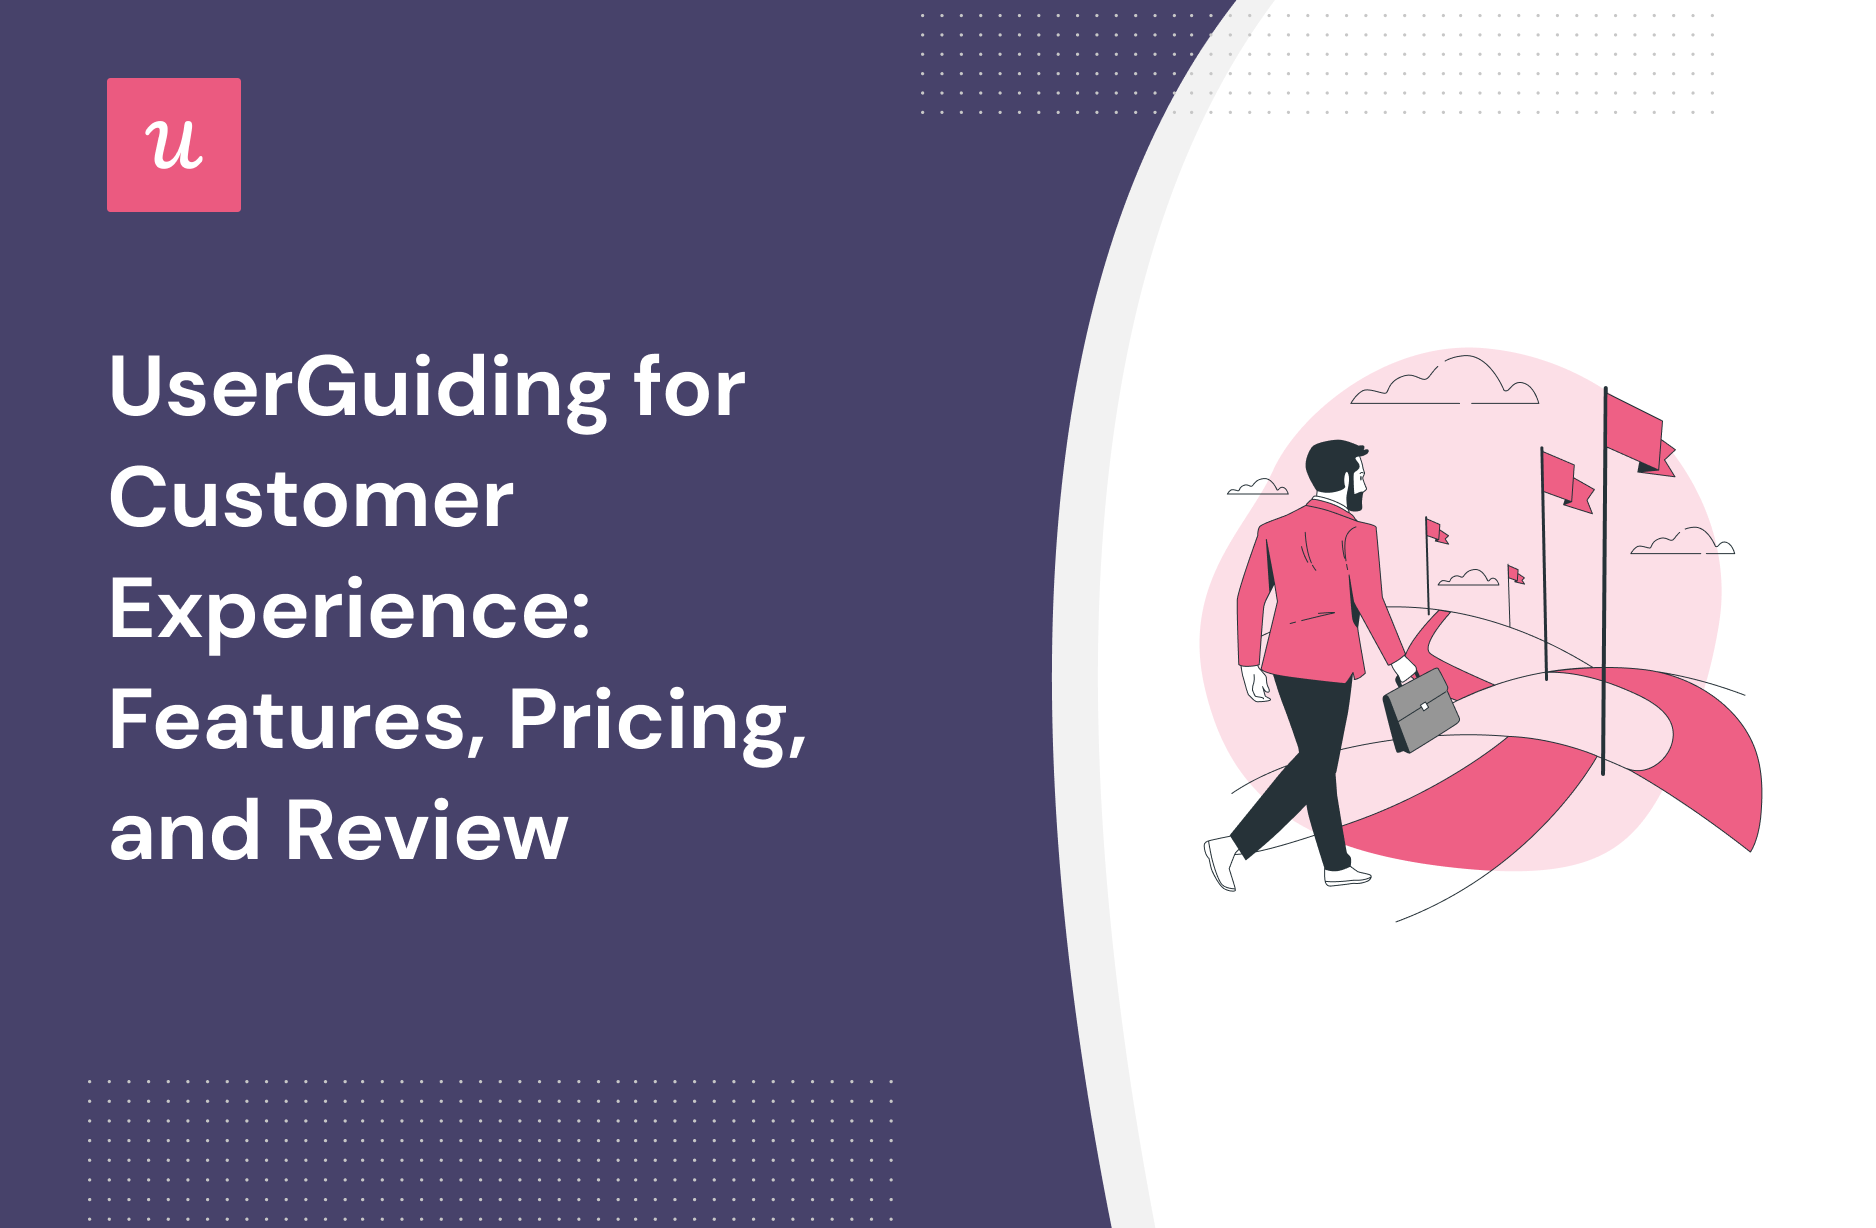 UserGuiding for Customer Experience: Features, Pricing, and Review